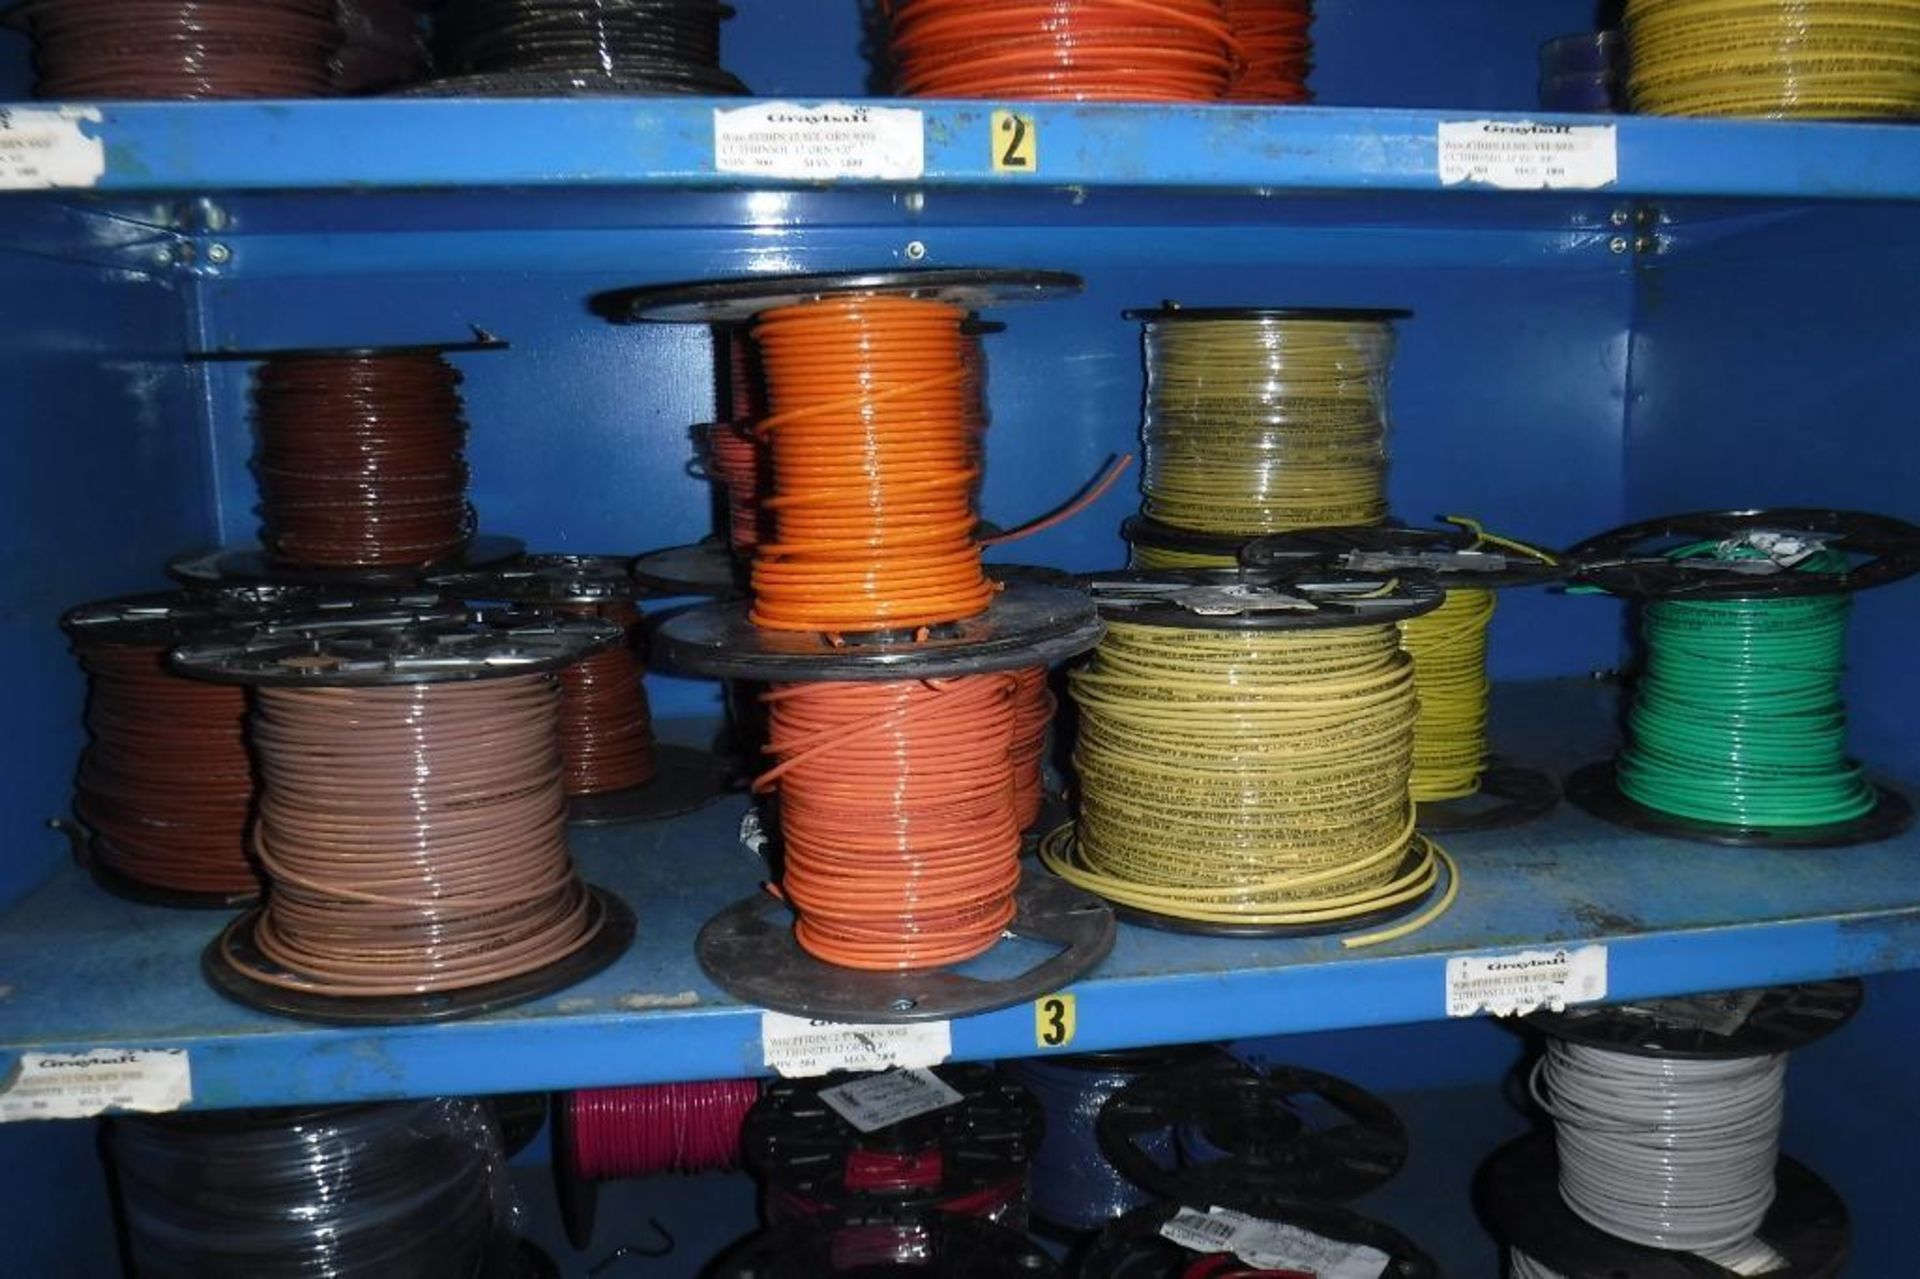 Contents of Rack 080S-Spools of Wire, MUST REMOVE BY 2/14/20-MUST BE REMOVED IN THE ENTIRITY - Image 4 of 8